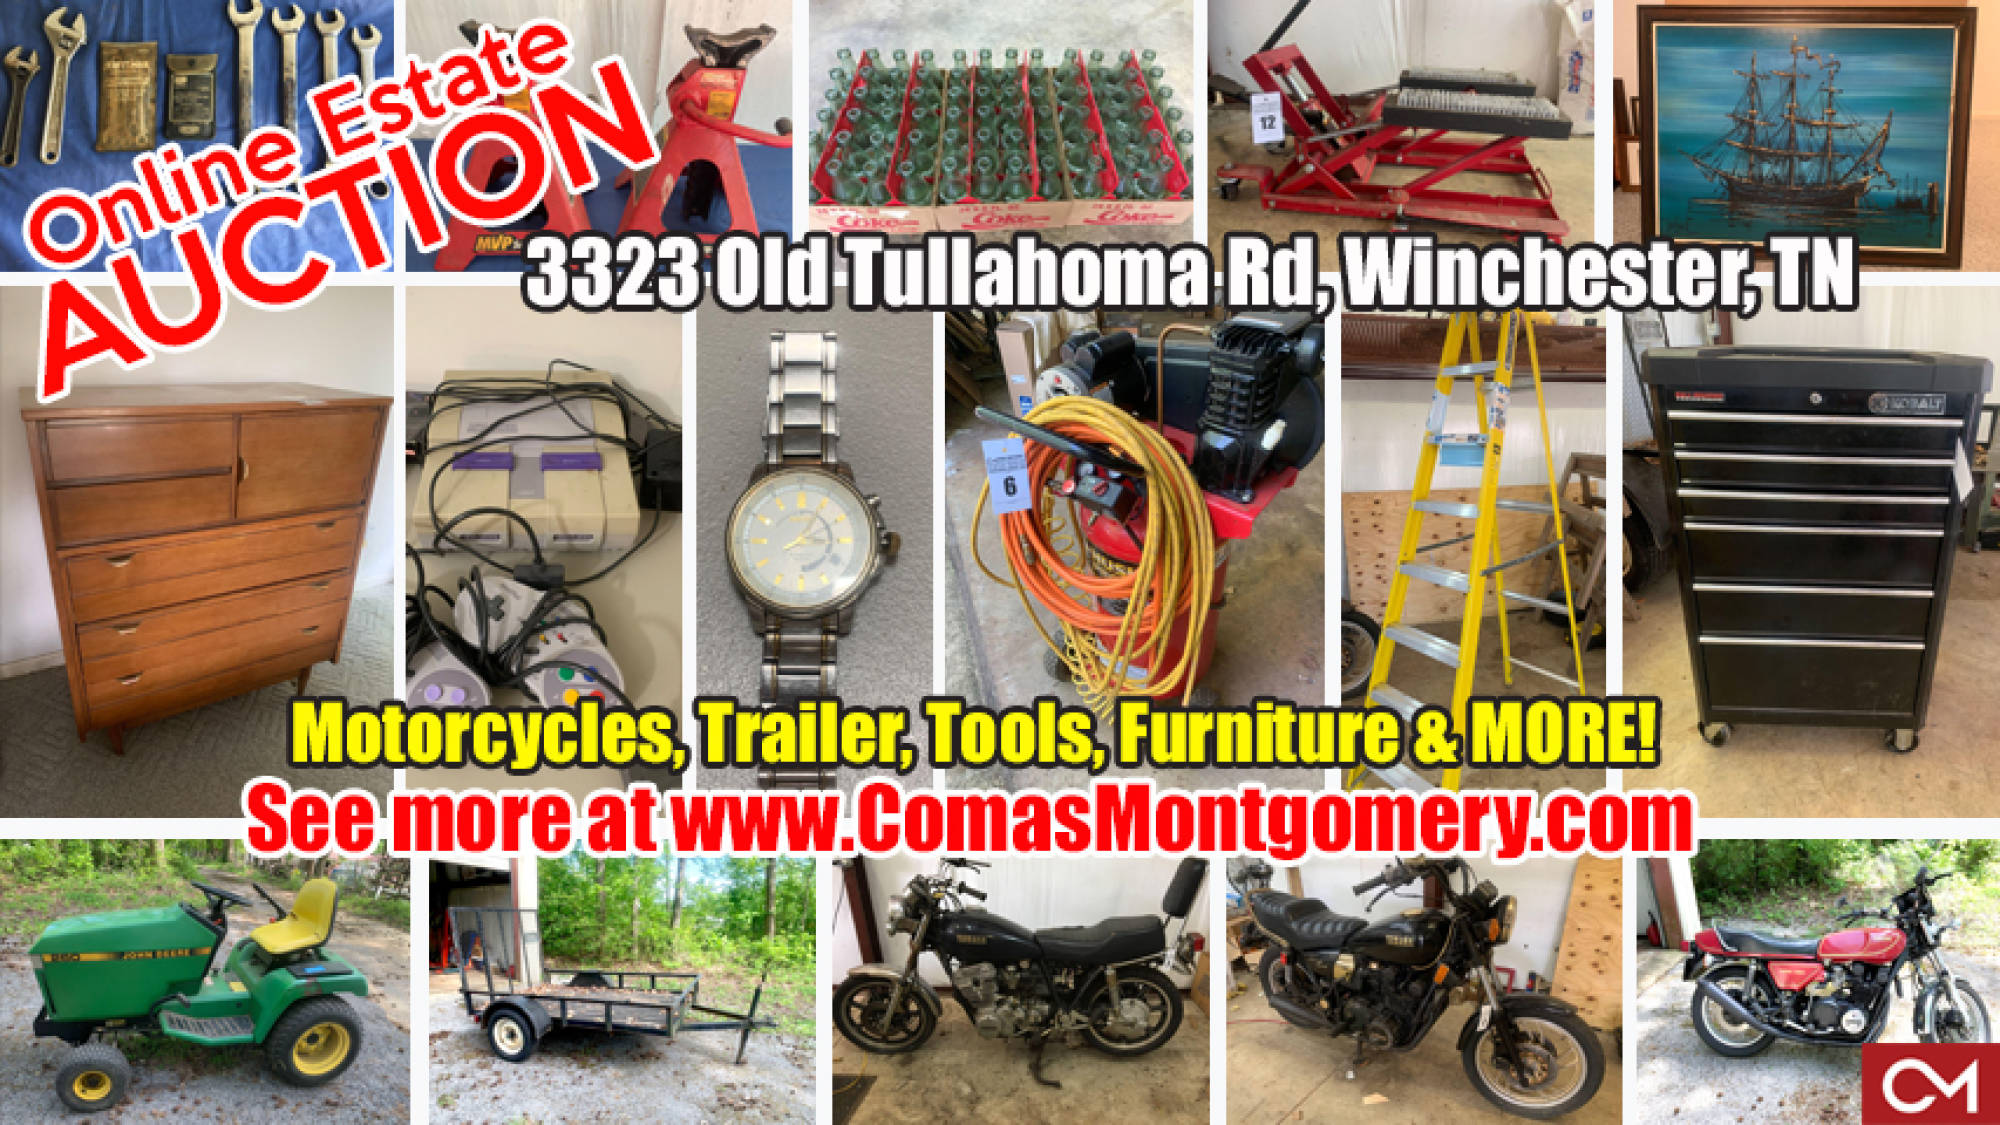 Harley, Davidson, Motorcycle, Motorcycles, Motorbikes, For Sale, Trailer, John Deere, Furniture, Tools, DeWalt, Coca-Cola, Collectibles, Appliances, Nintendo, Electronics, Watches, Jacks, Auto, Repair, Estate, Auction, Sale, Bid, Online, Winchester, Franklin County, Tennessee, Comas, Montgomery